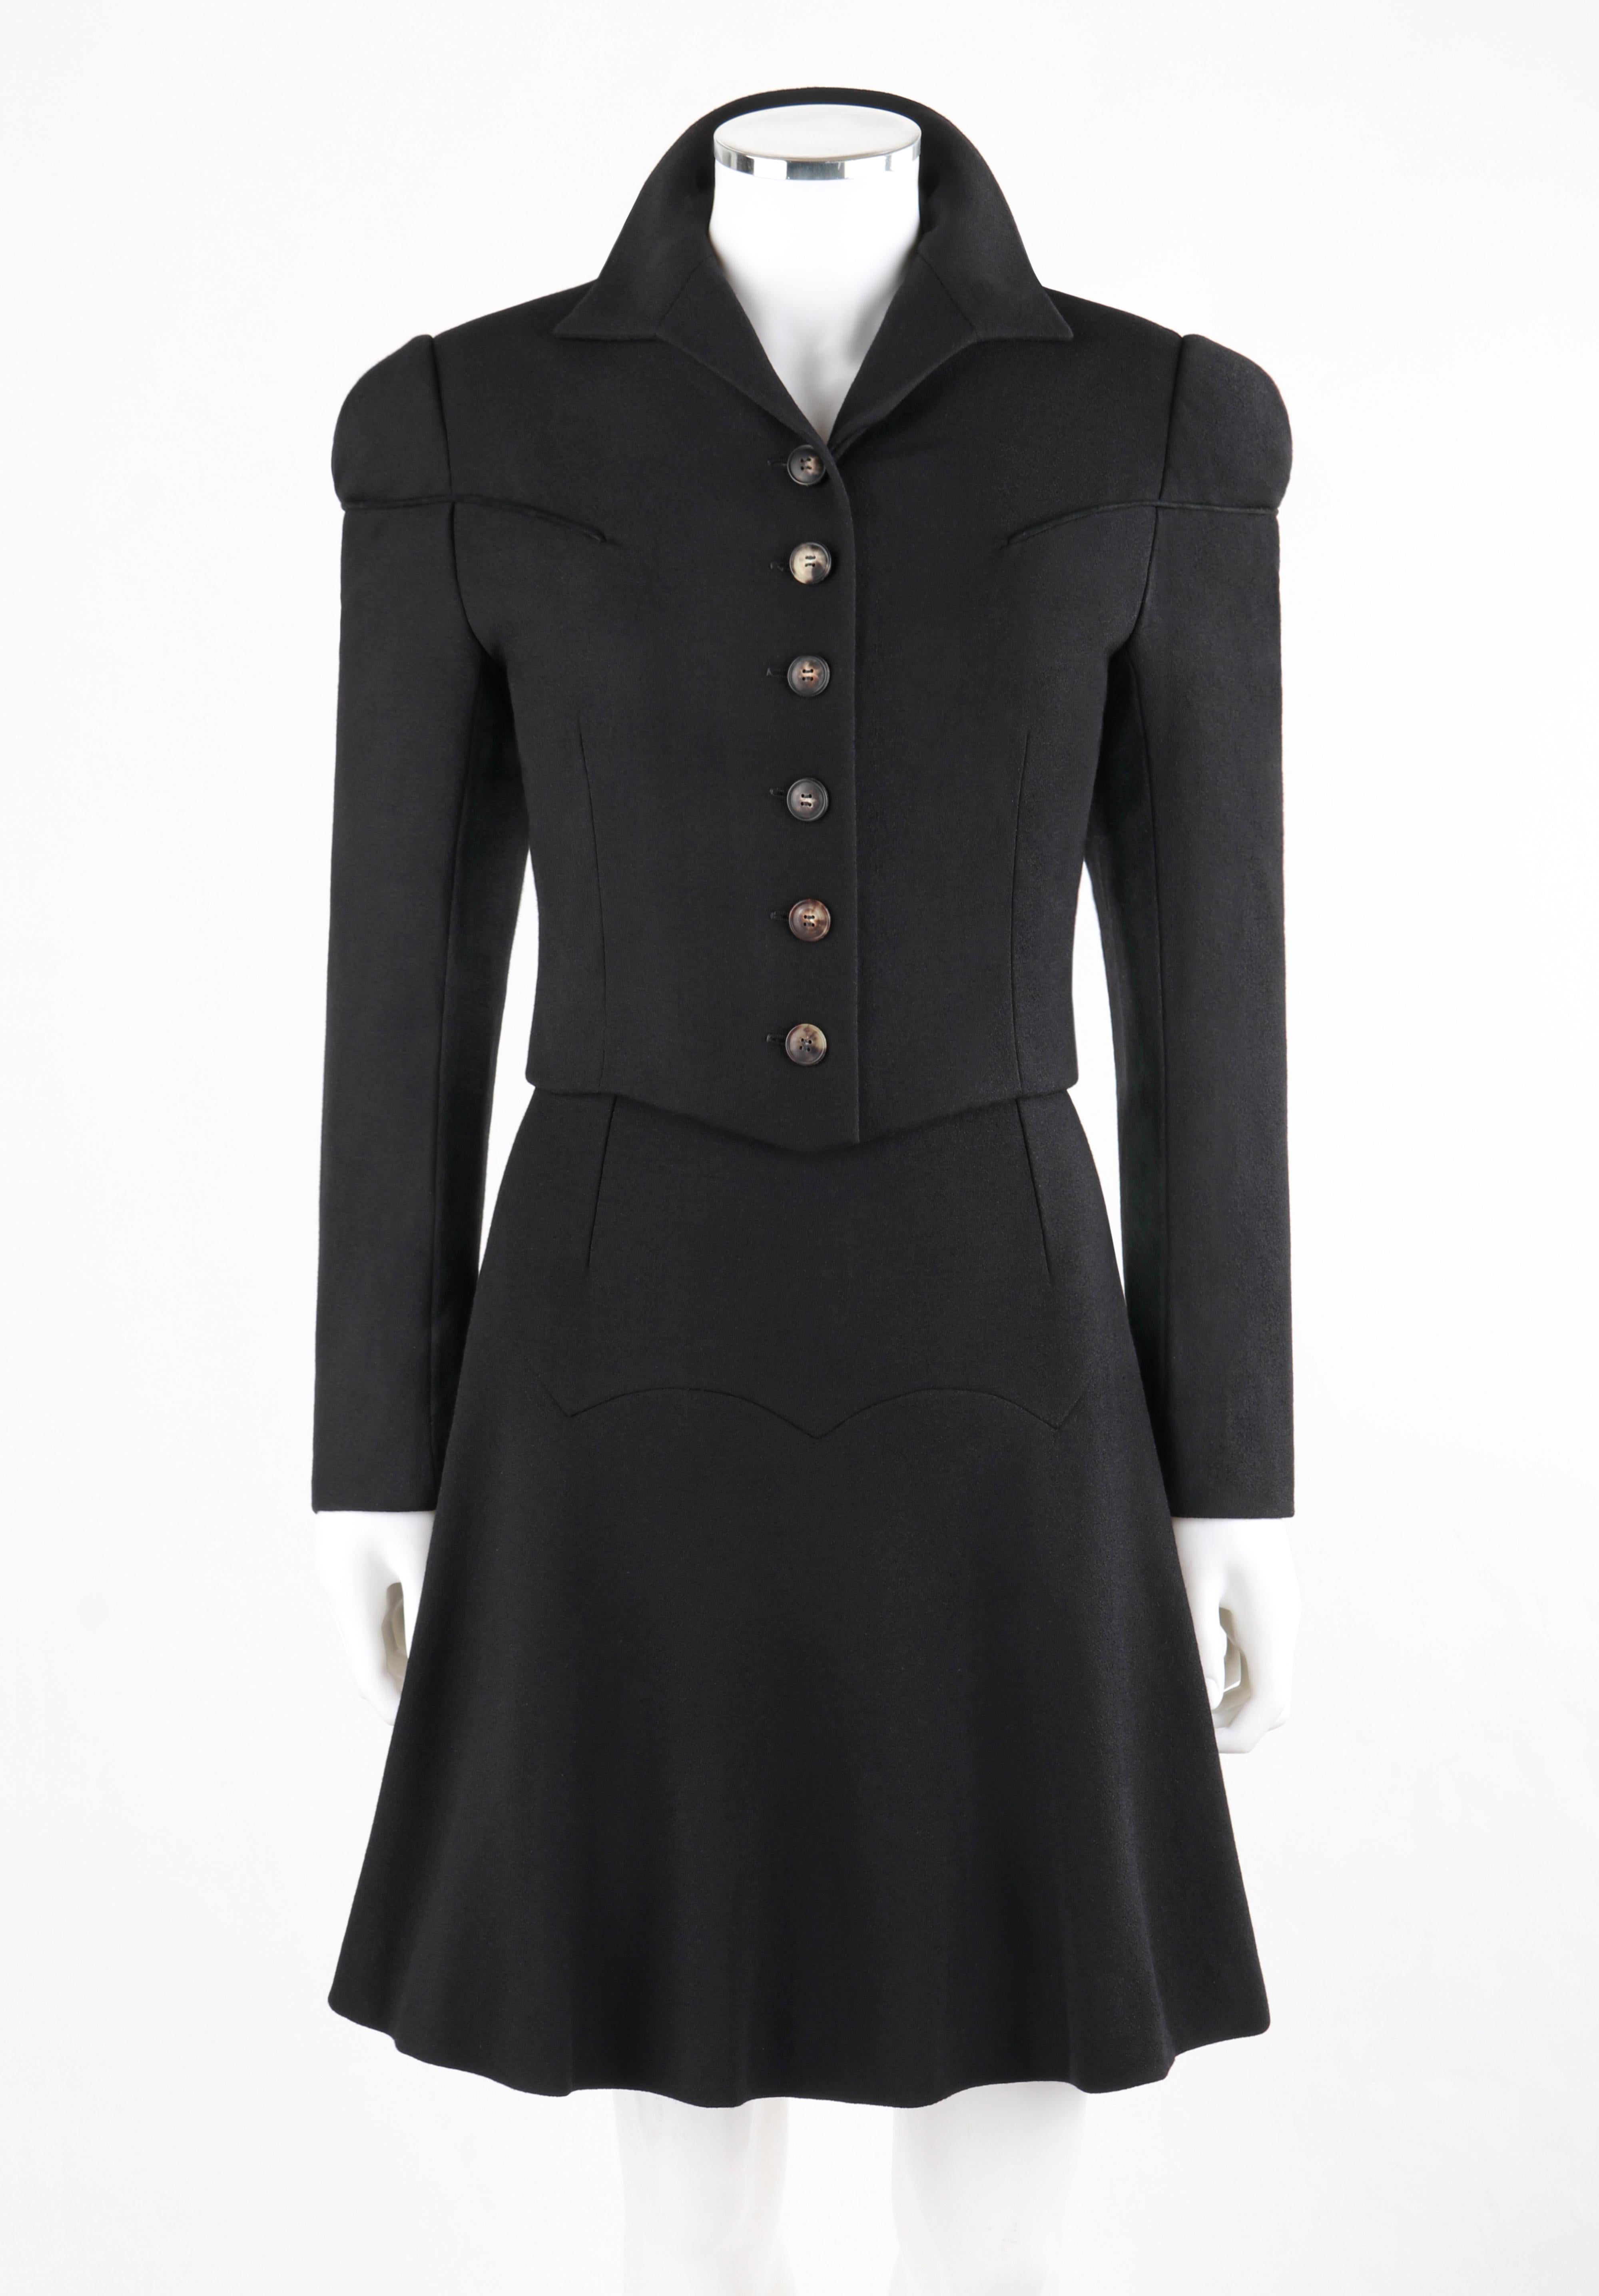 Givenchy Couture by John Galliano two piece black wool skirt suit from the Autumn-Winter 1996 Collection. Long sleeved cropped jacket has piped detail. Buttons at front. Padded shoulders. Fully lined. A-line skirt has a yoke with scalloped edge